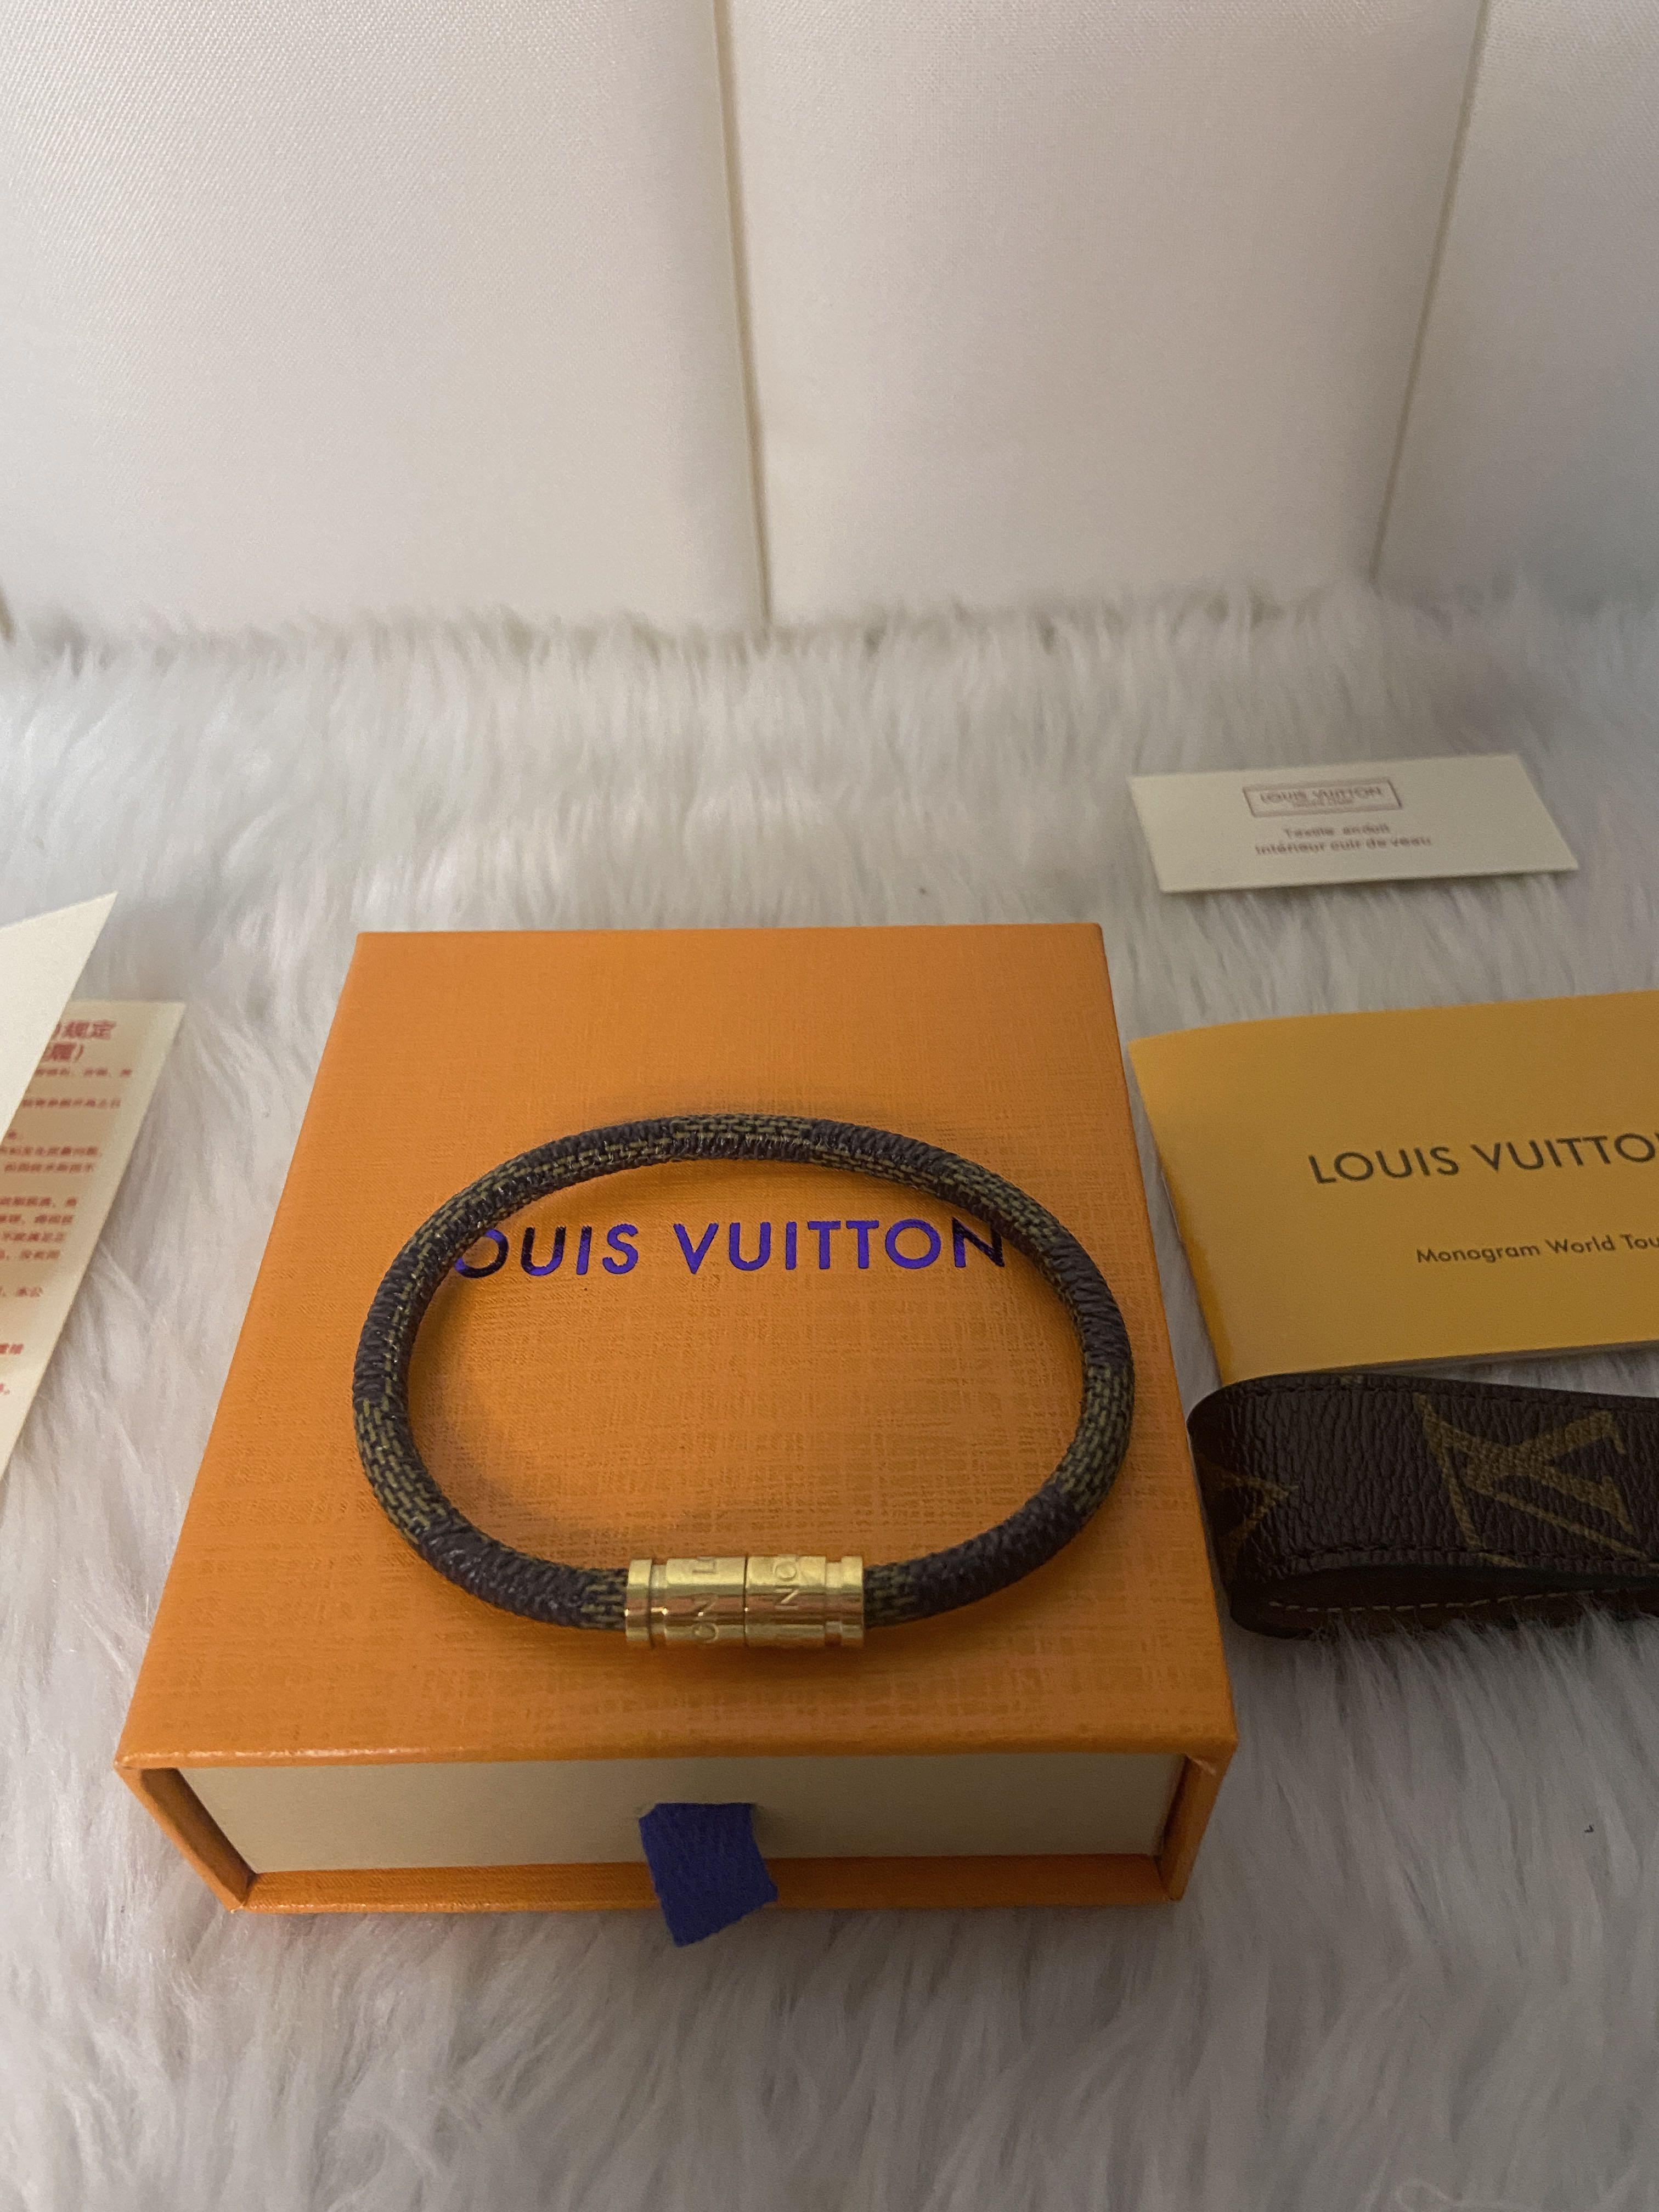 Louis Vuitton LV Monogram Party Bracelet / Necklace, Men's Fashion, Watches  & Accessories, Jewelry on Carousell